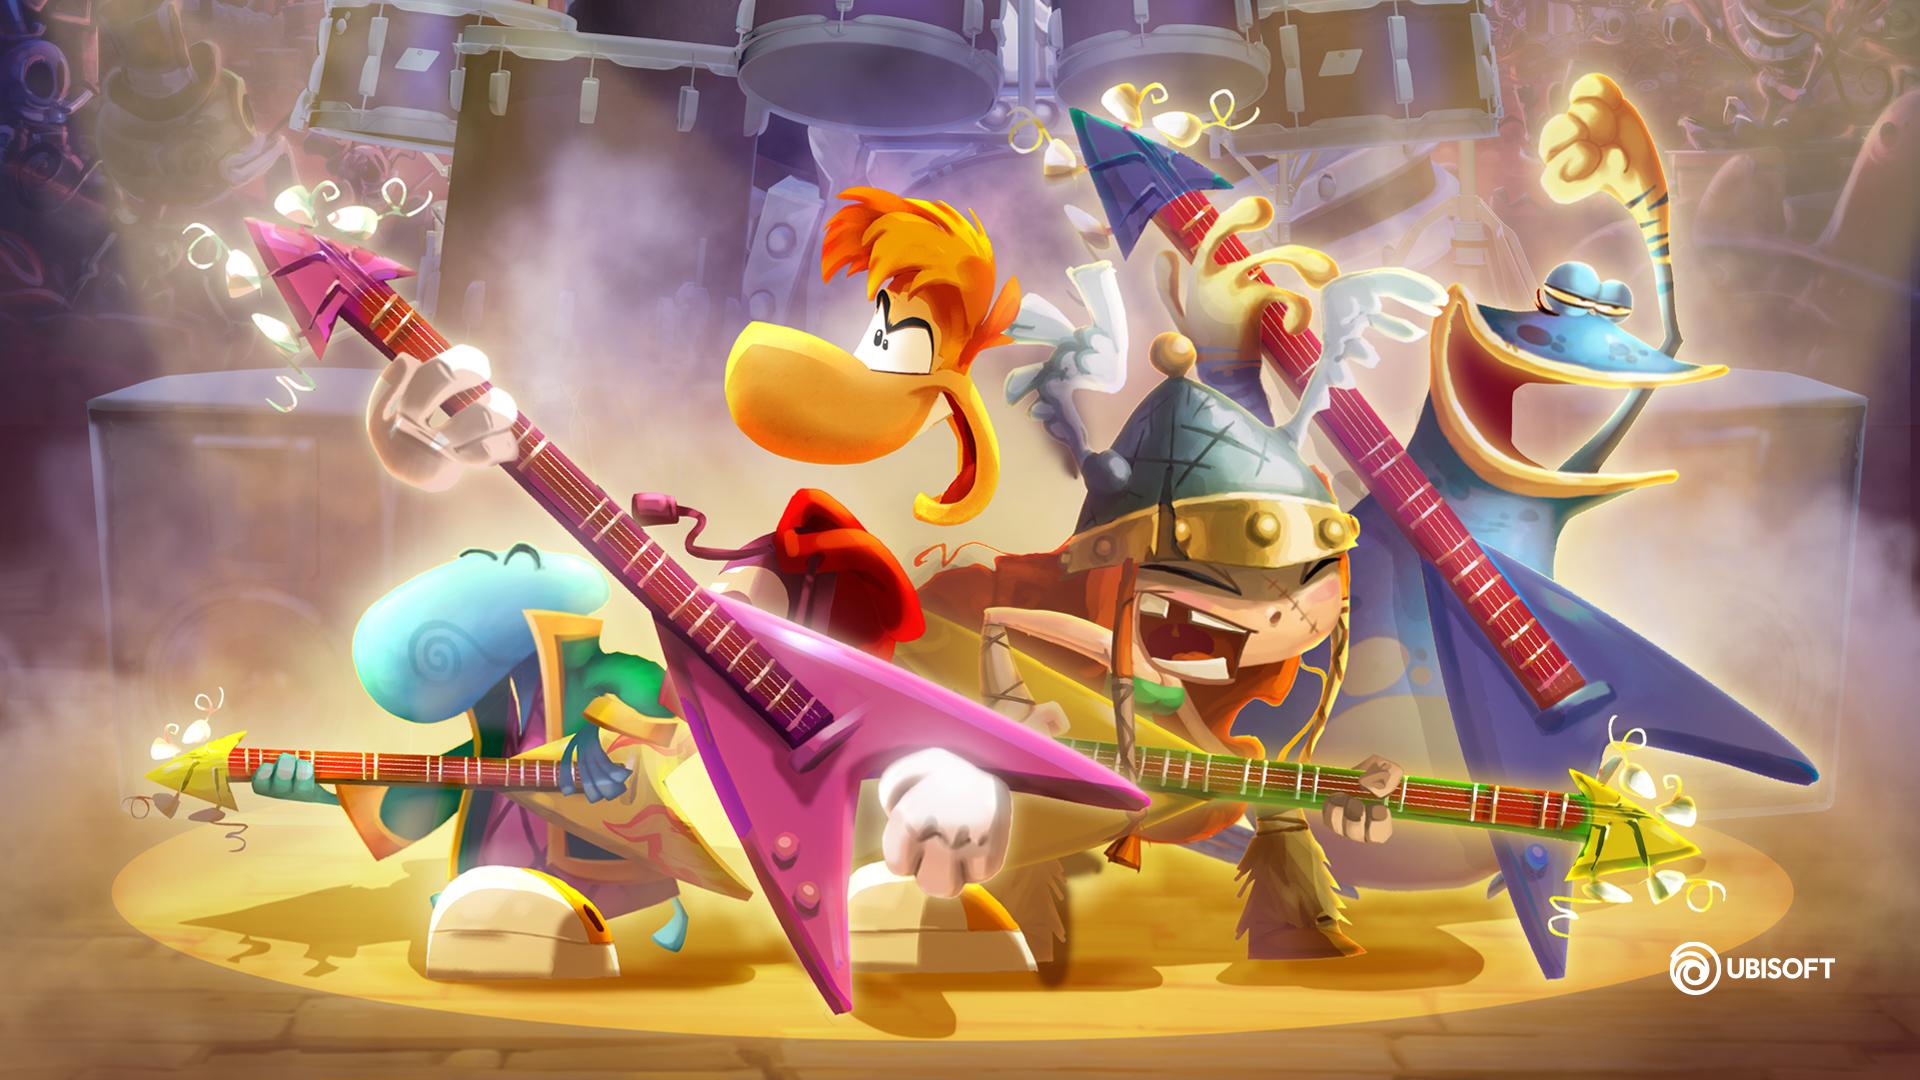 HD wallpaper, Video Game Characters, Ubisoft, Rayman, Video Games